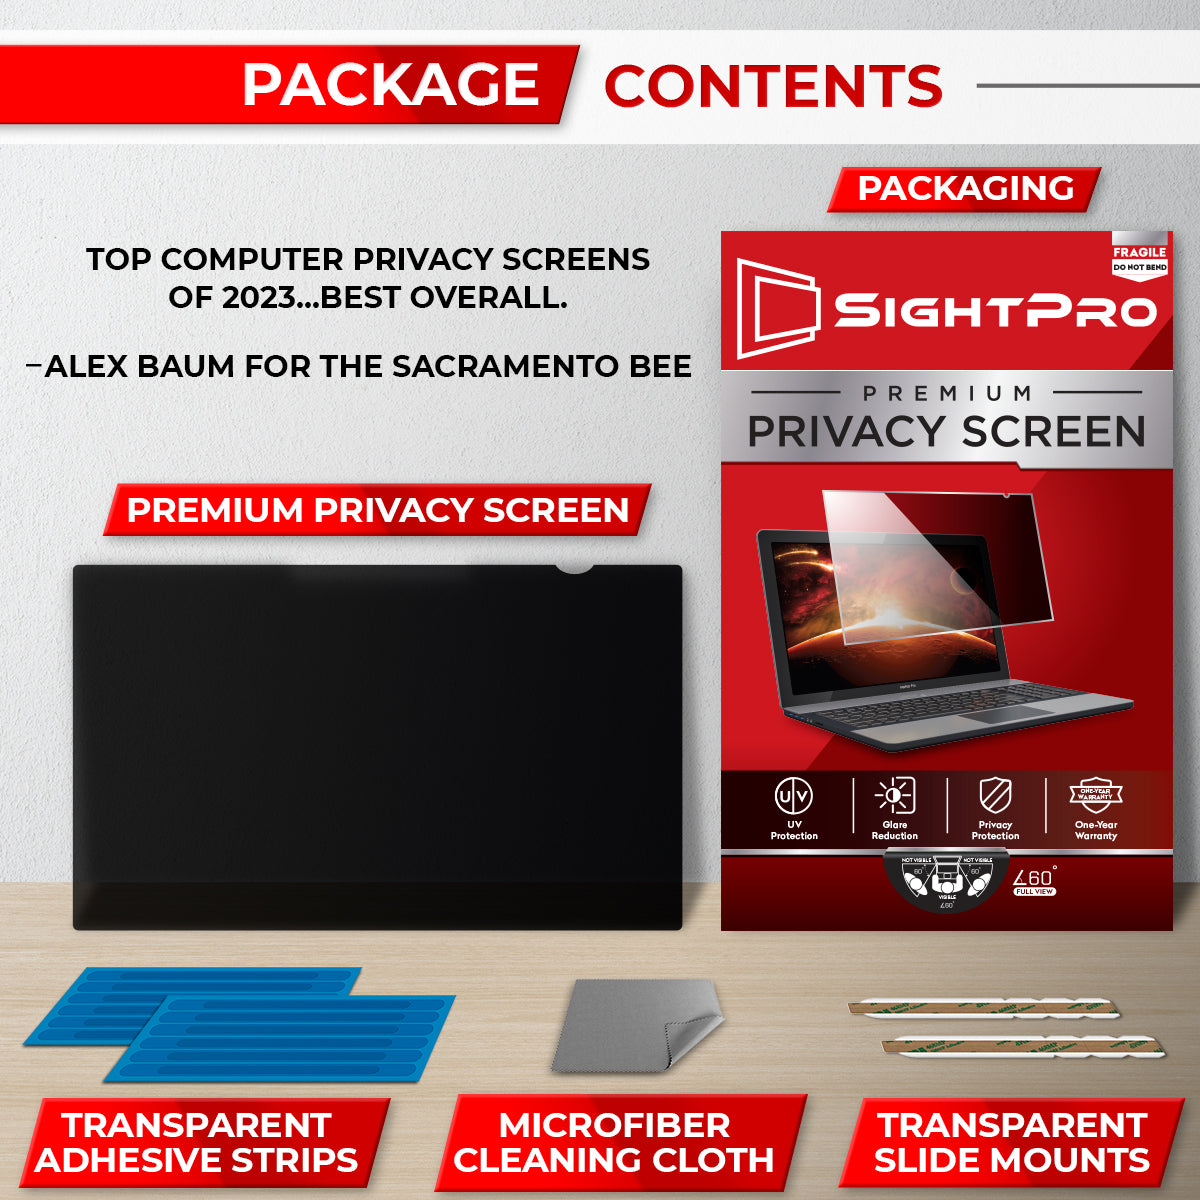 SightPro 12.5 Inch 16:9 Edge-to-Edge Privacy Screen Filter for Laptops